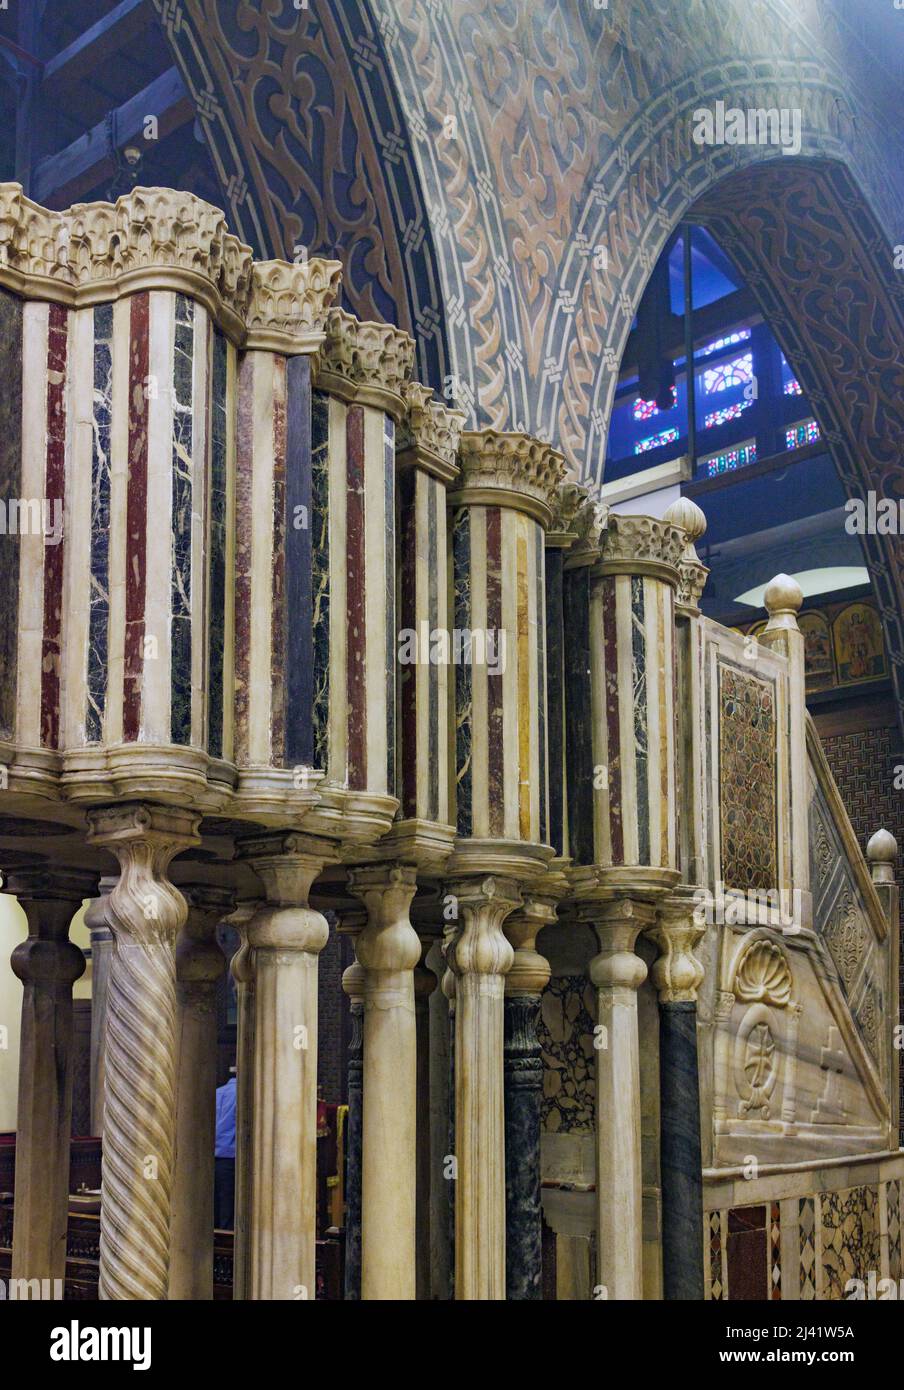 detail of marble pulpit, the Elevated or Hanging Church of St. Mary, Cairo, Egypt Stock Photo